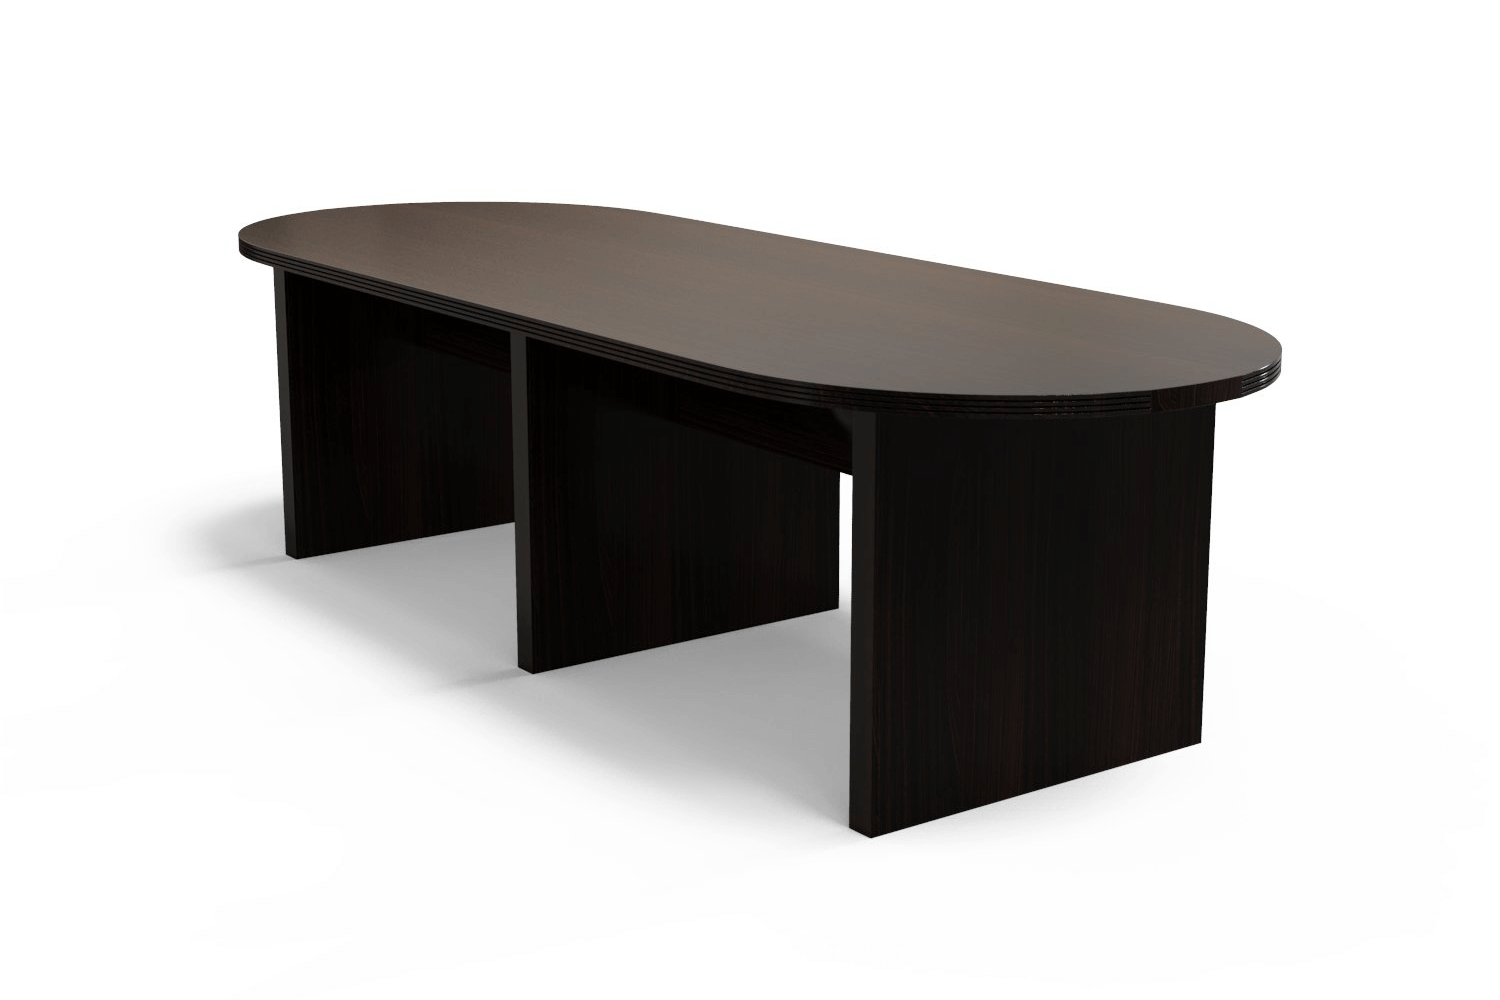 Product-Kai-Espresso-120-Racetrack-Conference-Table